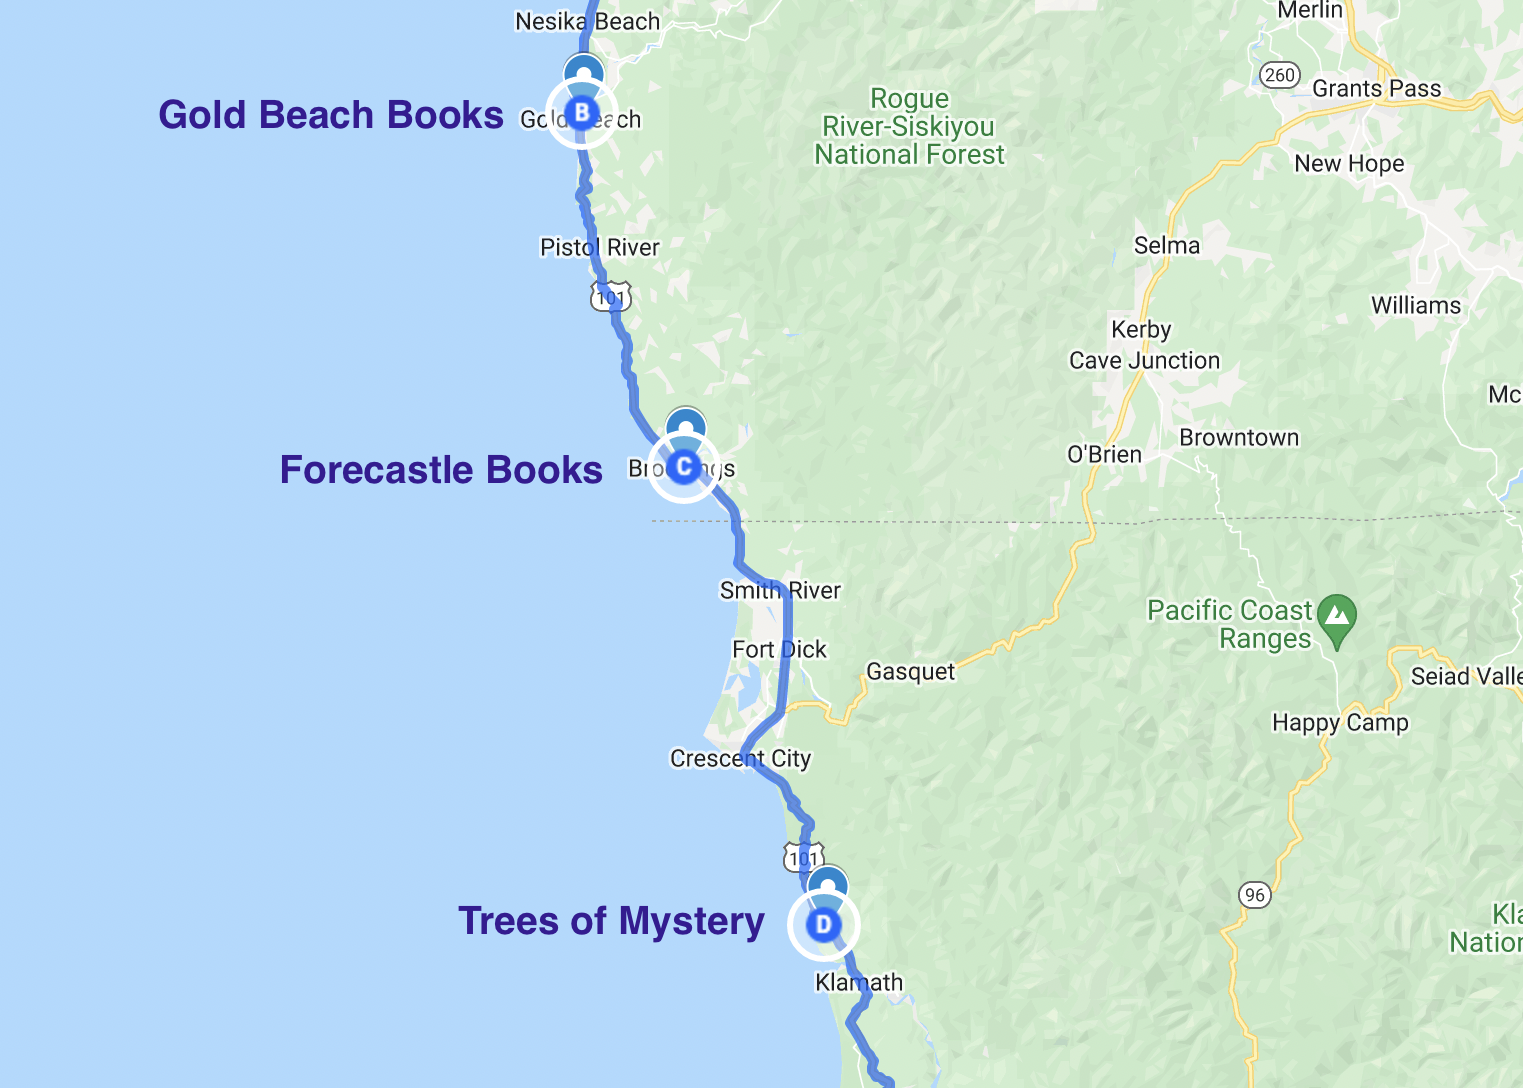 map of literary stops in the southern oregon coastline and northern California